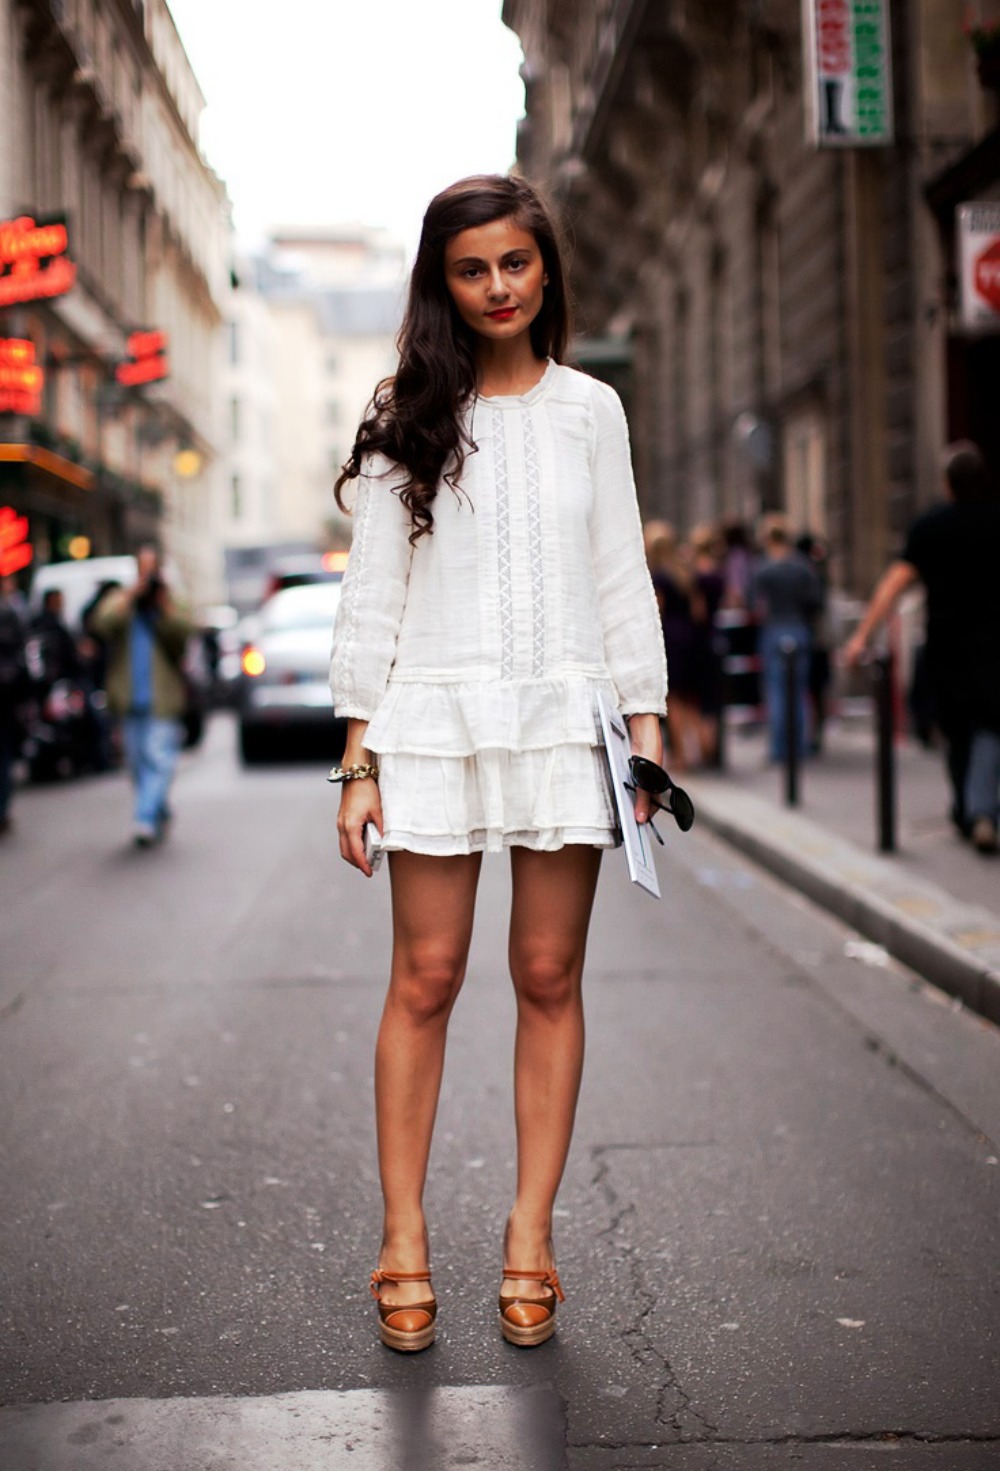 30 Stylish Women Outfits That Makes You Fashionista – The WoW Style